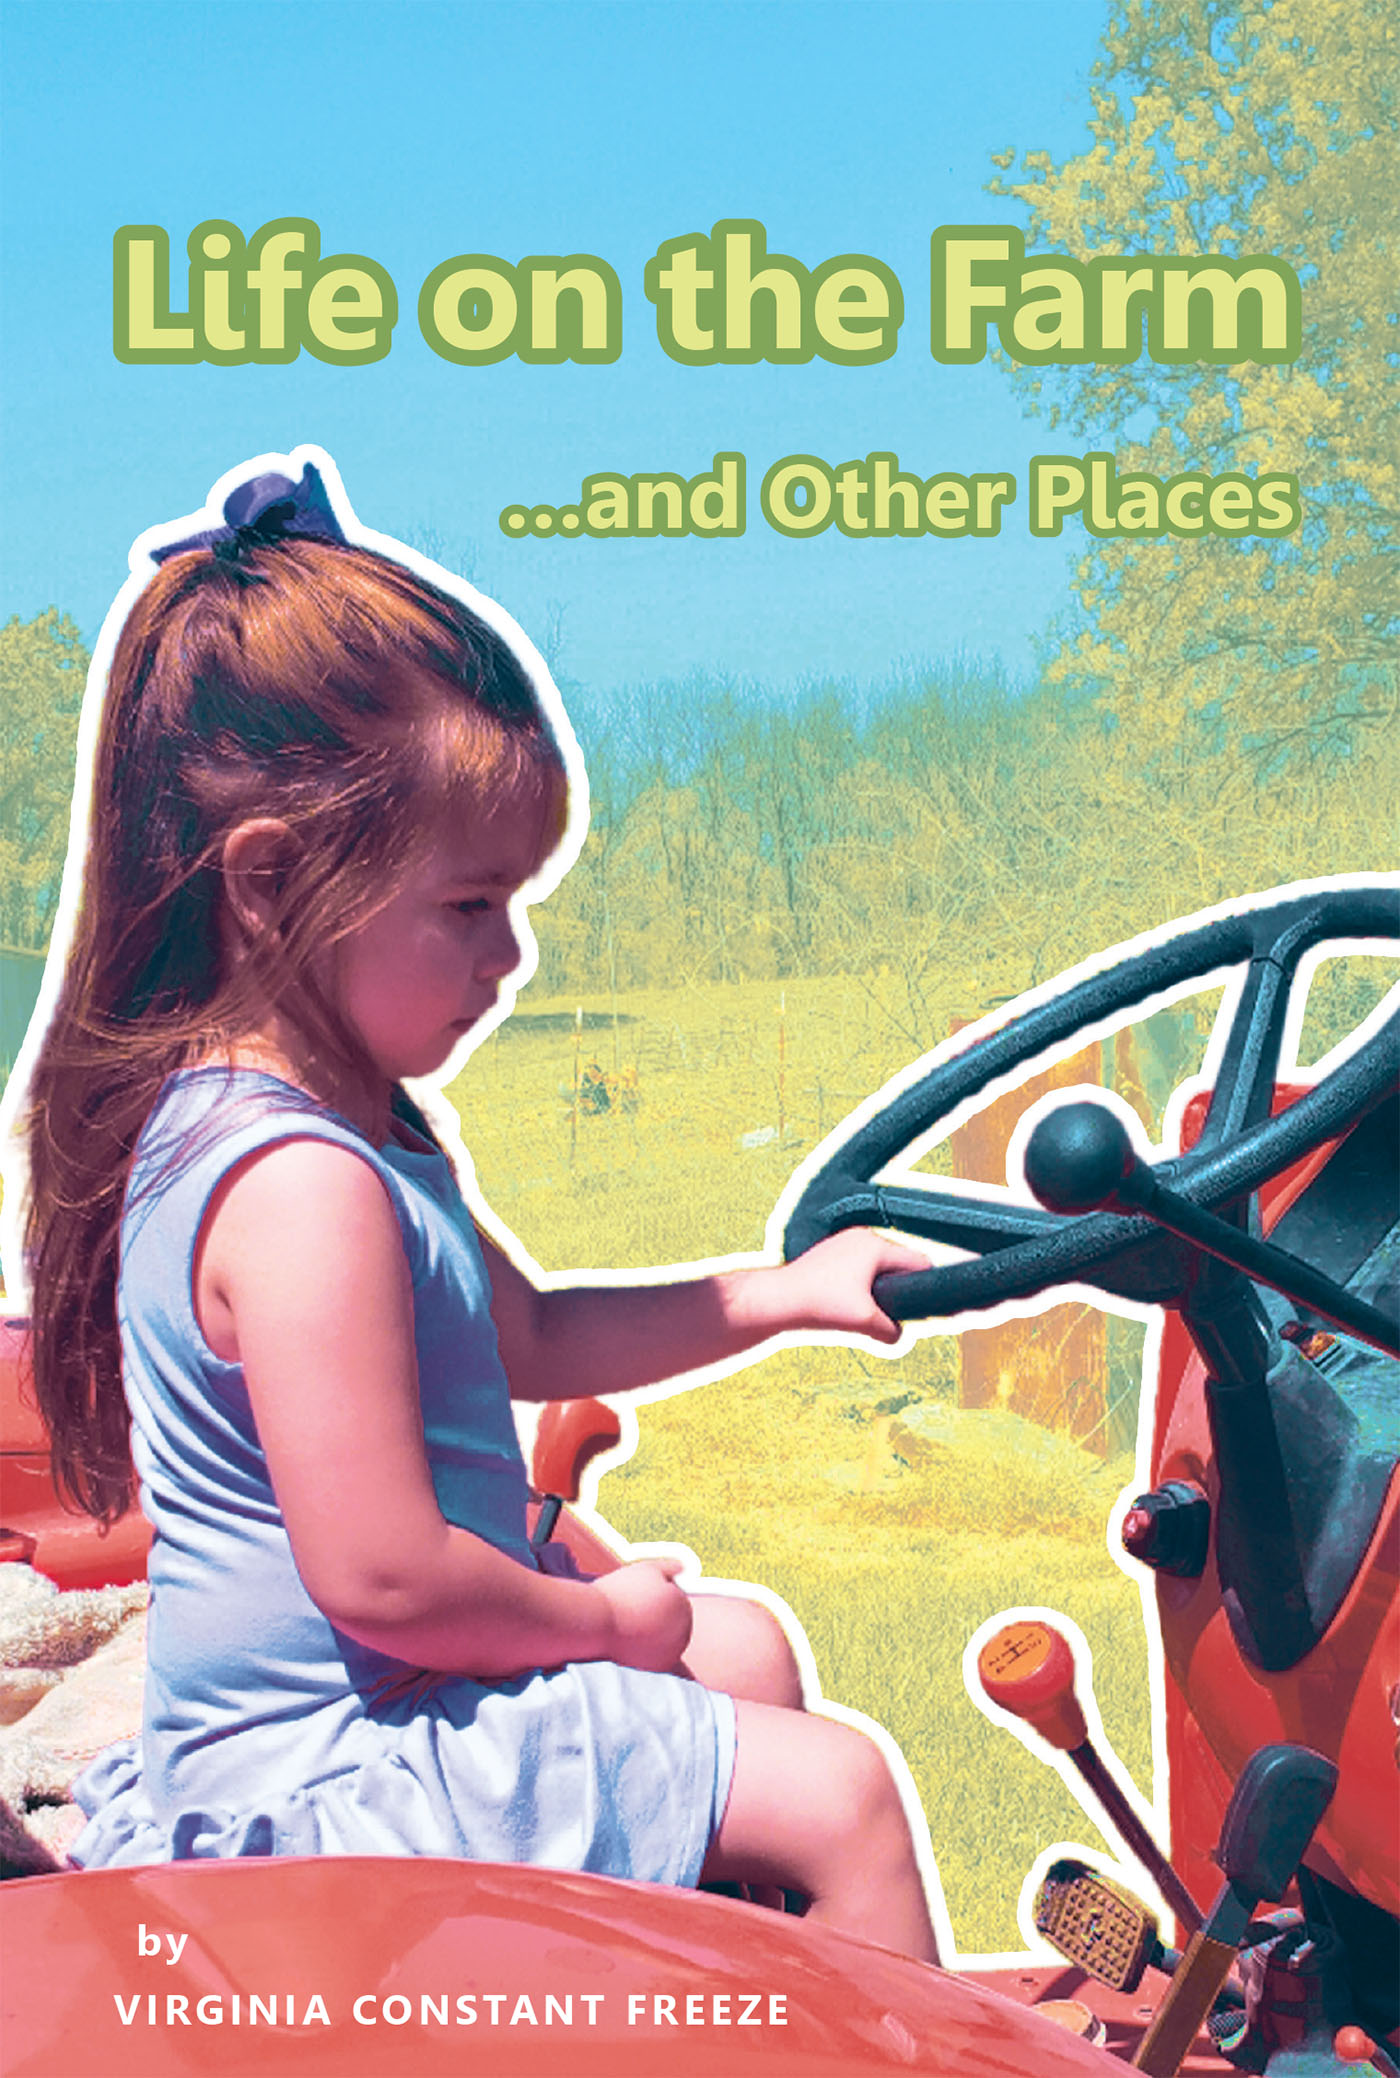 Virginia Constant Freeze’s Newly Released “Life on the Farm...and Other Places” is an Engaging Collection of Poetry That Draws from Daily Adventure